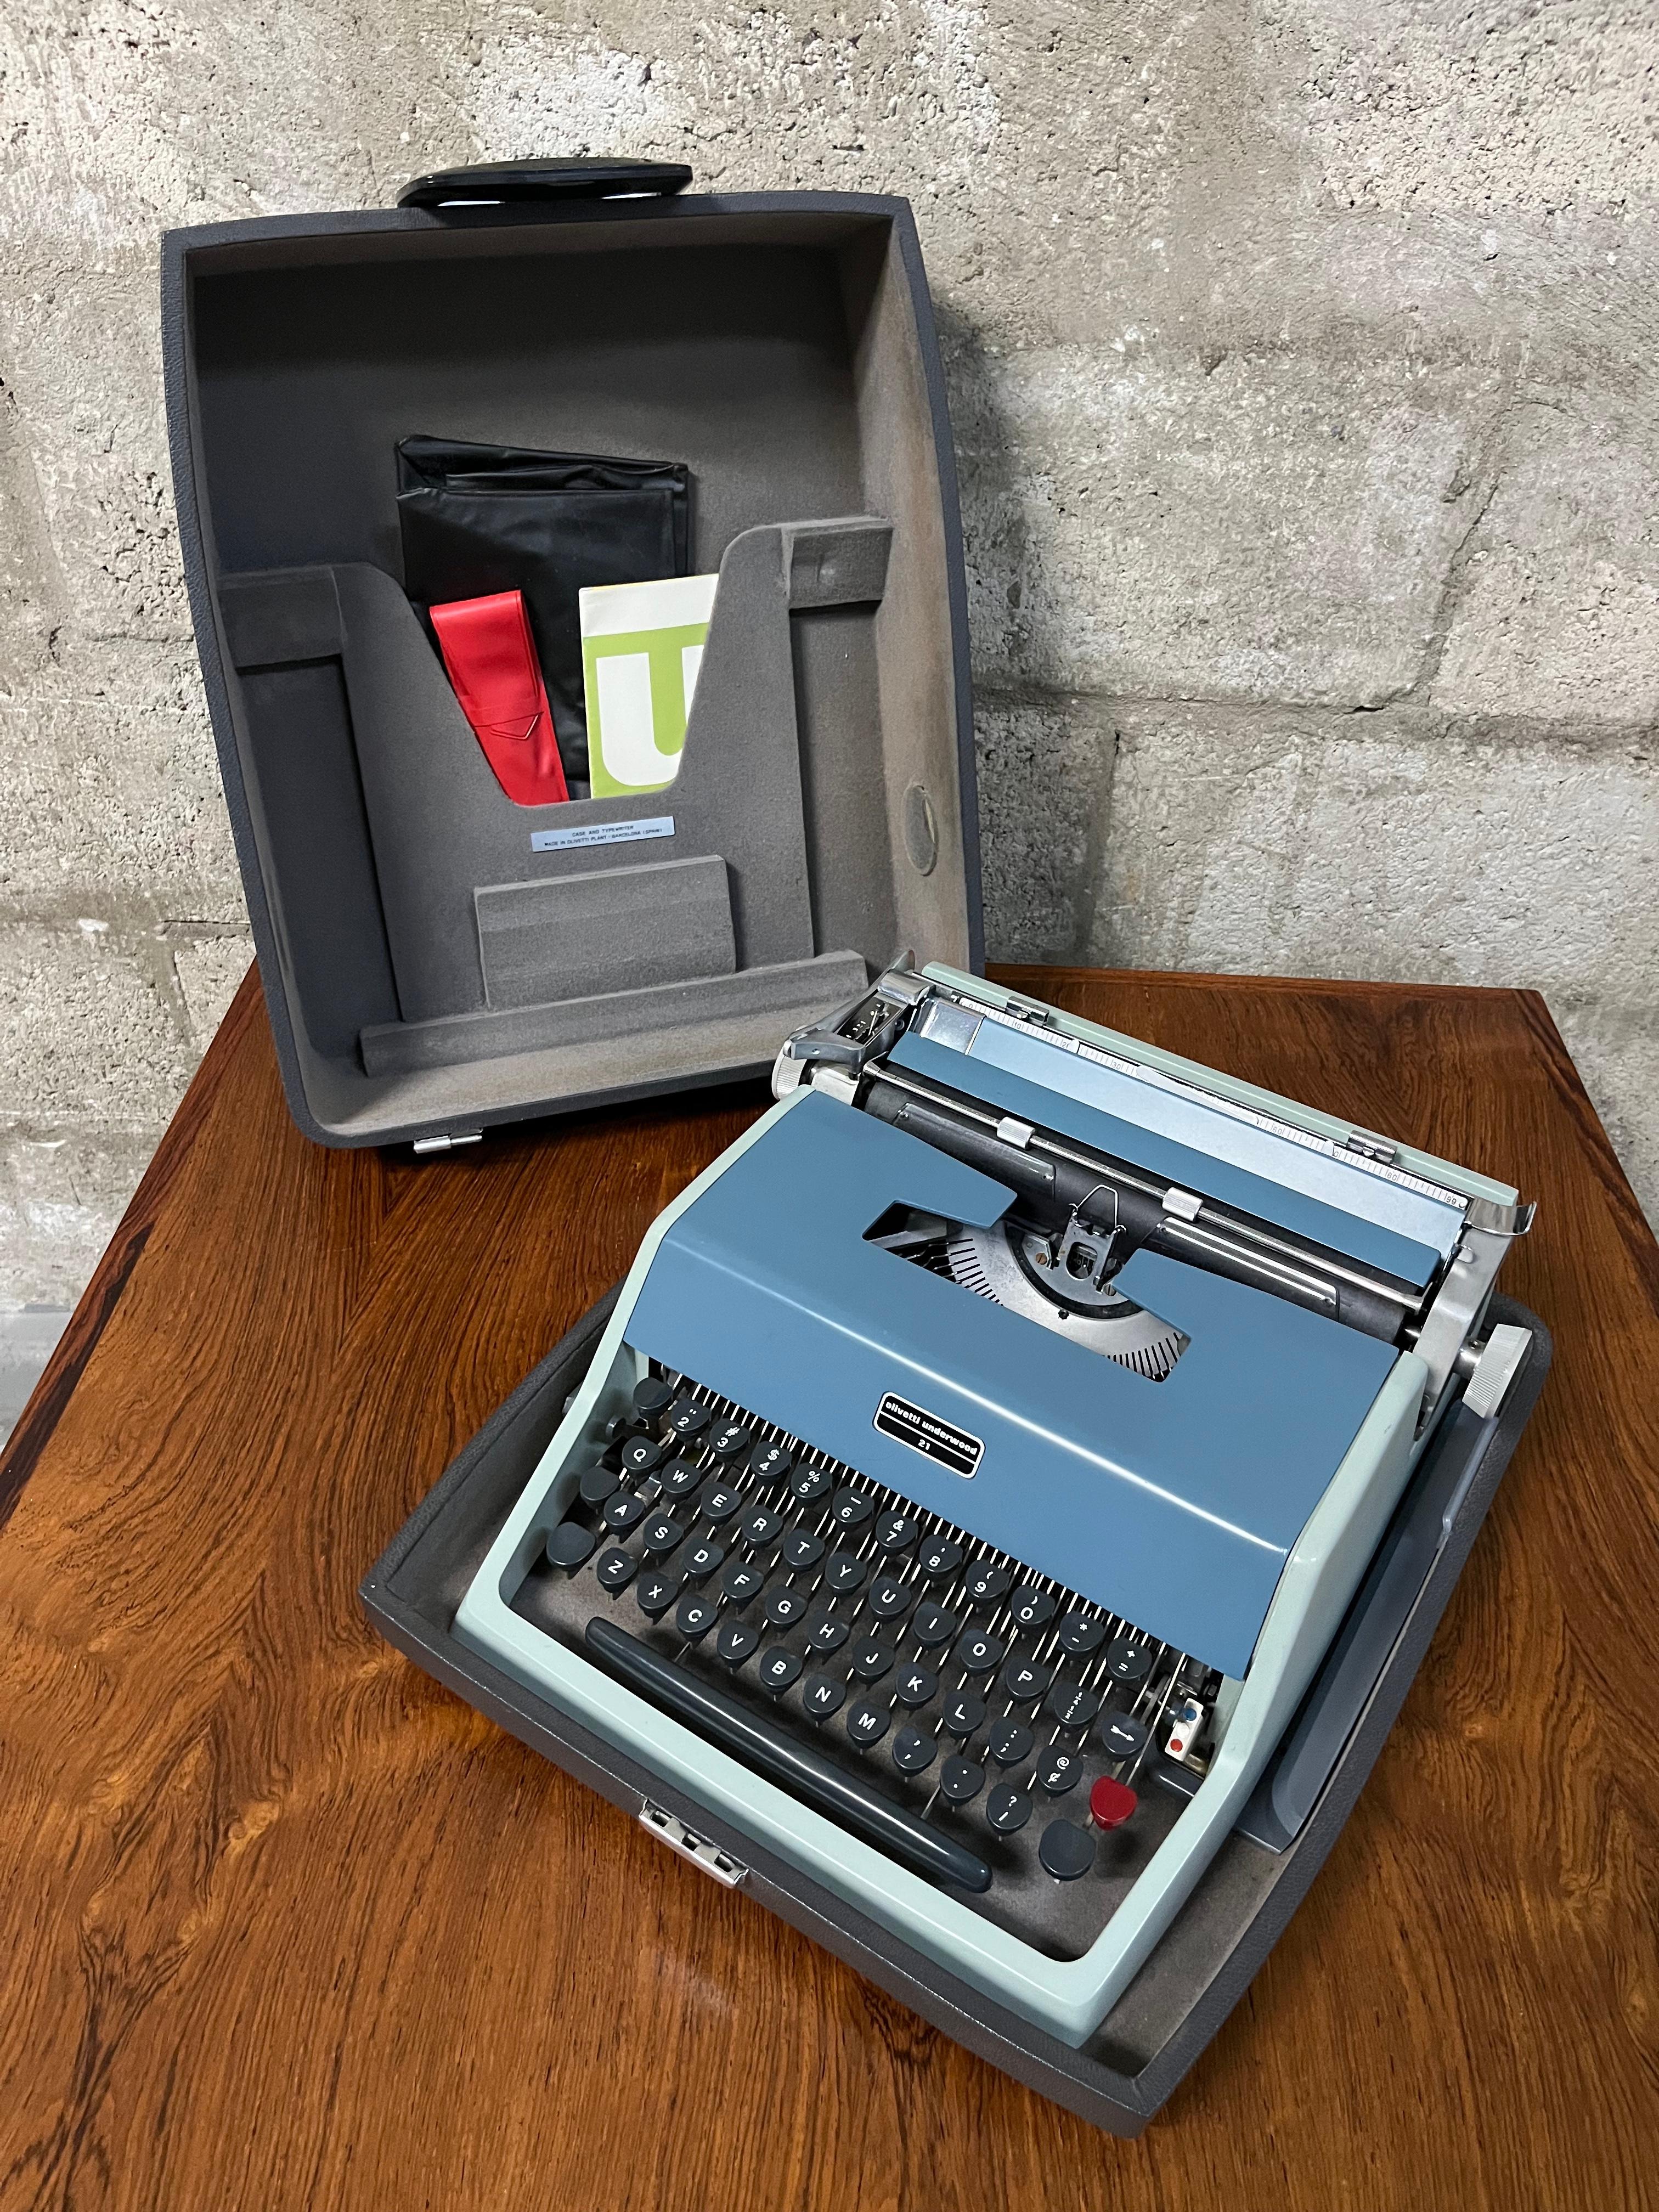 1960s Olivetti Underwood 21 Portable Typewriter With Original Travel Case In Good Condition For Sale In Miami, FL